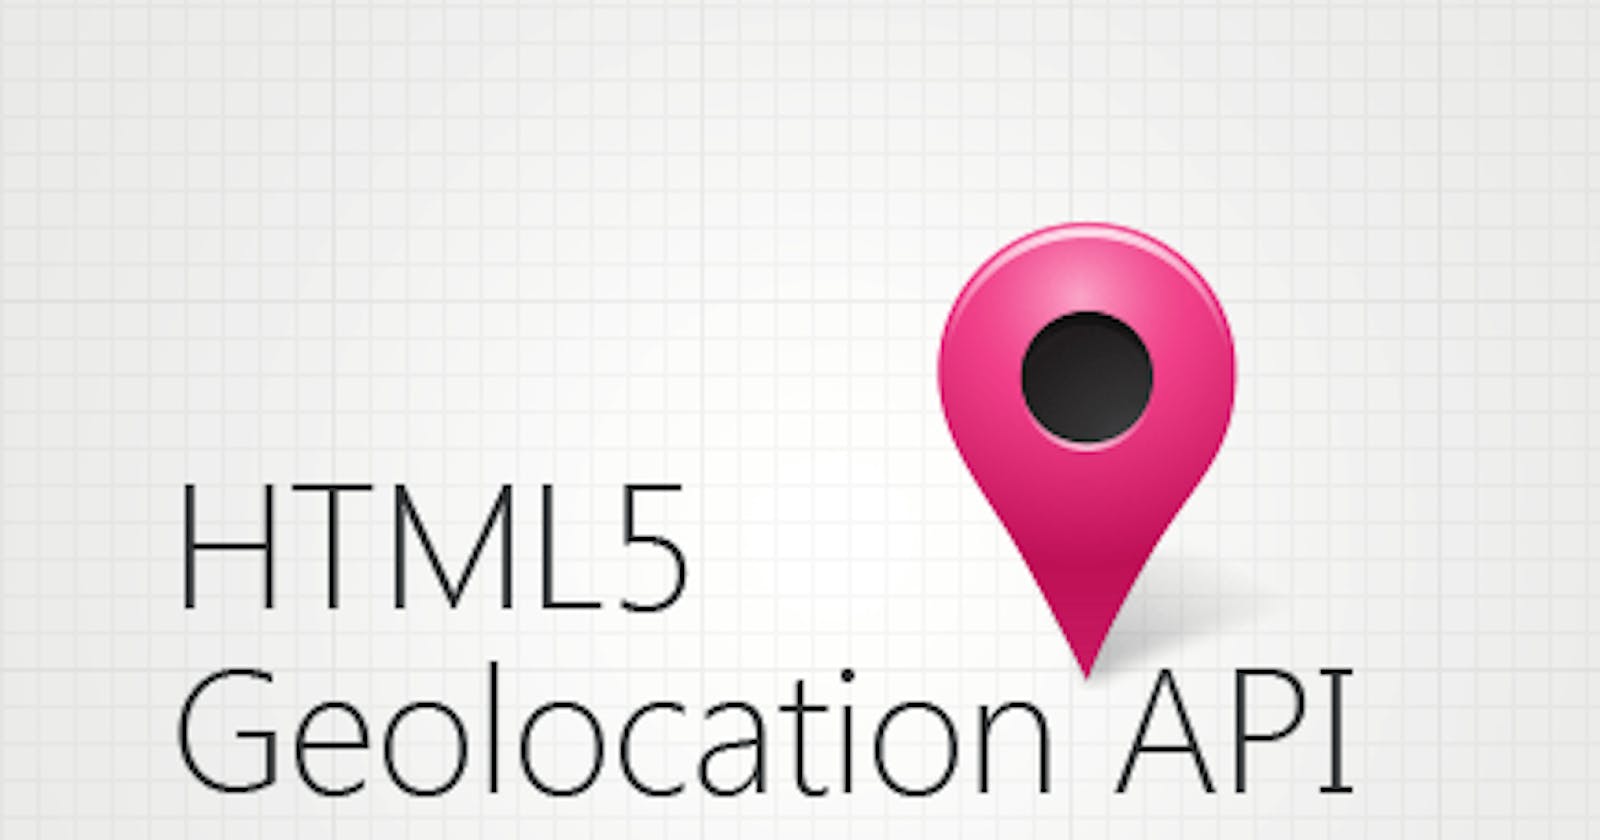 What is Geolocation API in HTML?